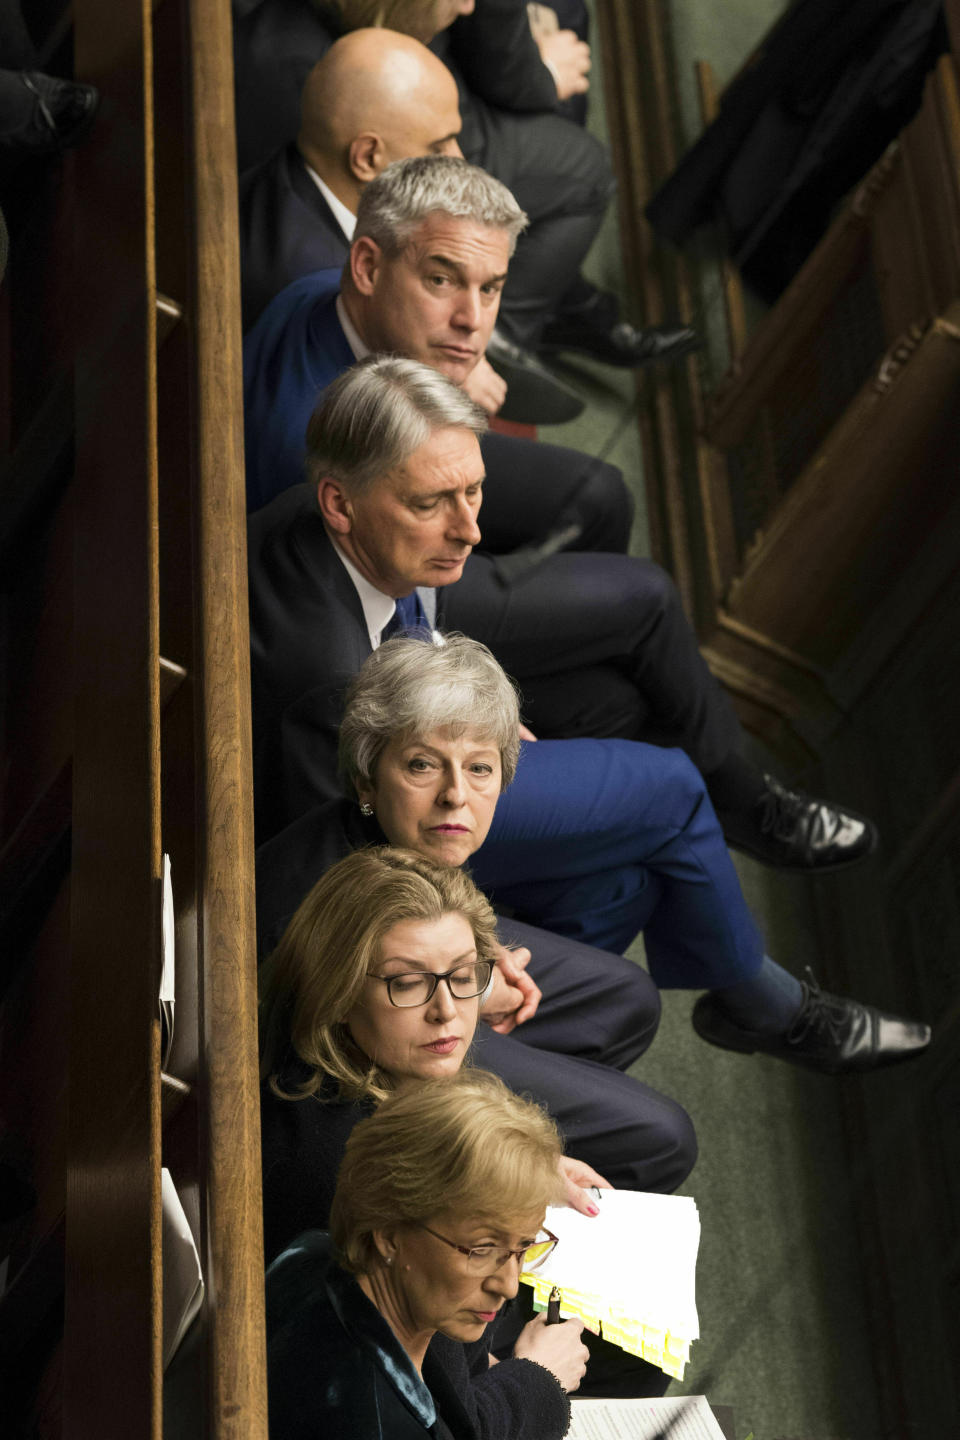 In this handout photo made available by UK Parliament, Britain's Prime Minister Theresa May and her cabinet members listen, during Prime Minister's Questions in the House of Commons, London, Wednesday March 20, 2019. Exactly 1,000 days after Britain voted to leave the European Union, and nine days before it is scheduled to walk out the door, Prime Minister Theresa May hit the pause button Wednesday, asking the bloc to postpone the U.K.'s departure until June 30. (UK Parliament/Mark Duffy/via AP)